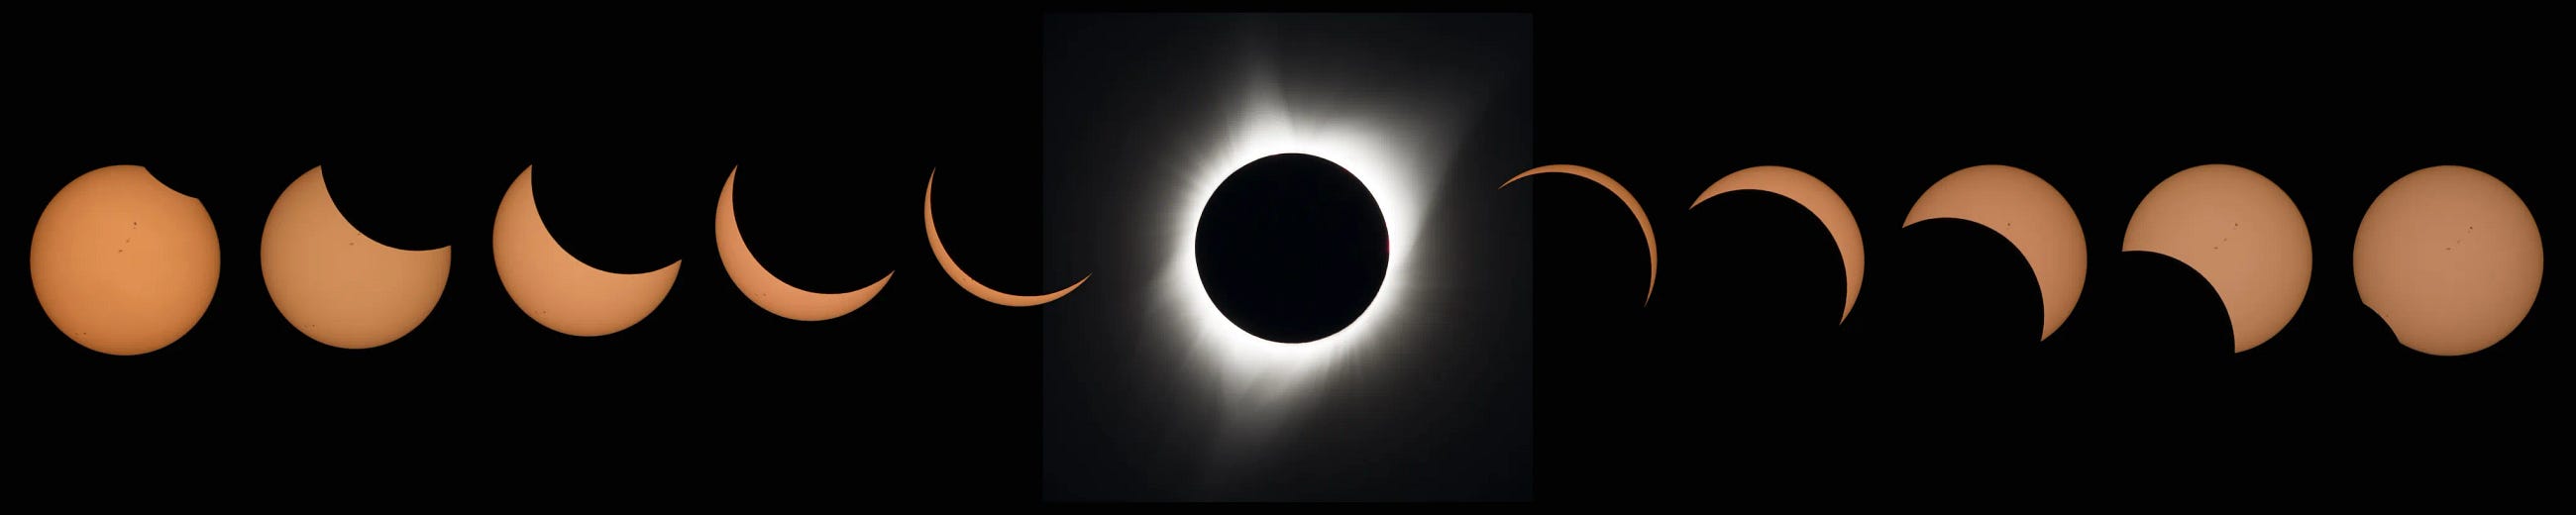 Quick Facts About Solar Eclipse